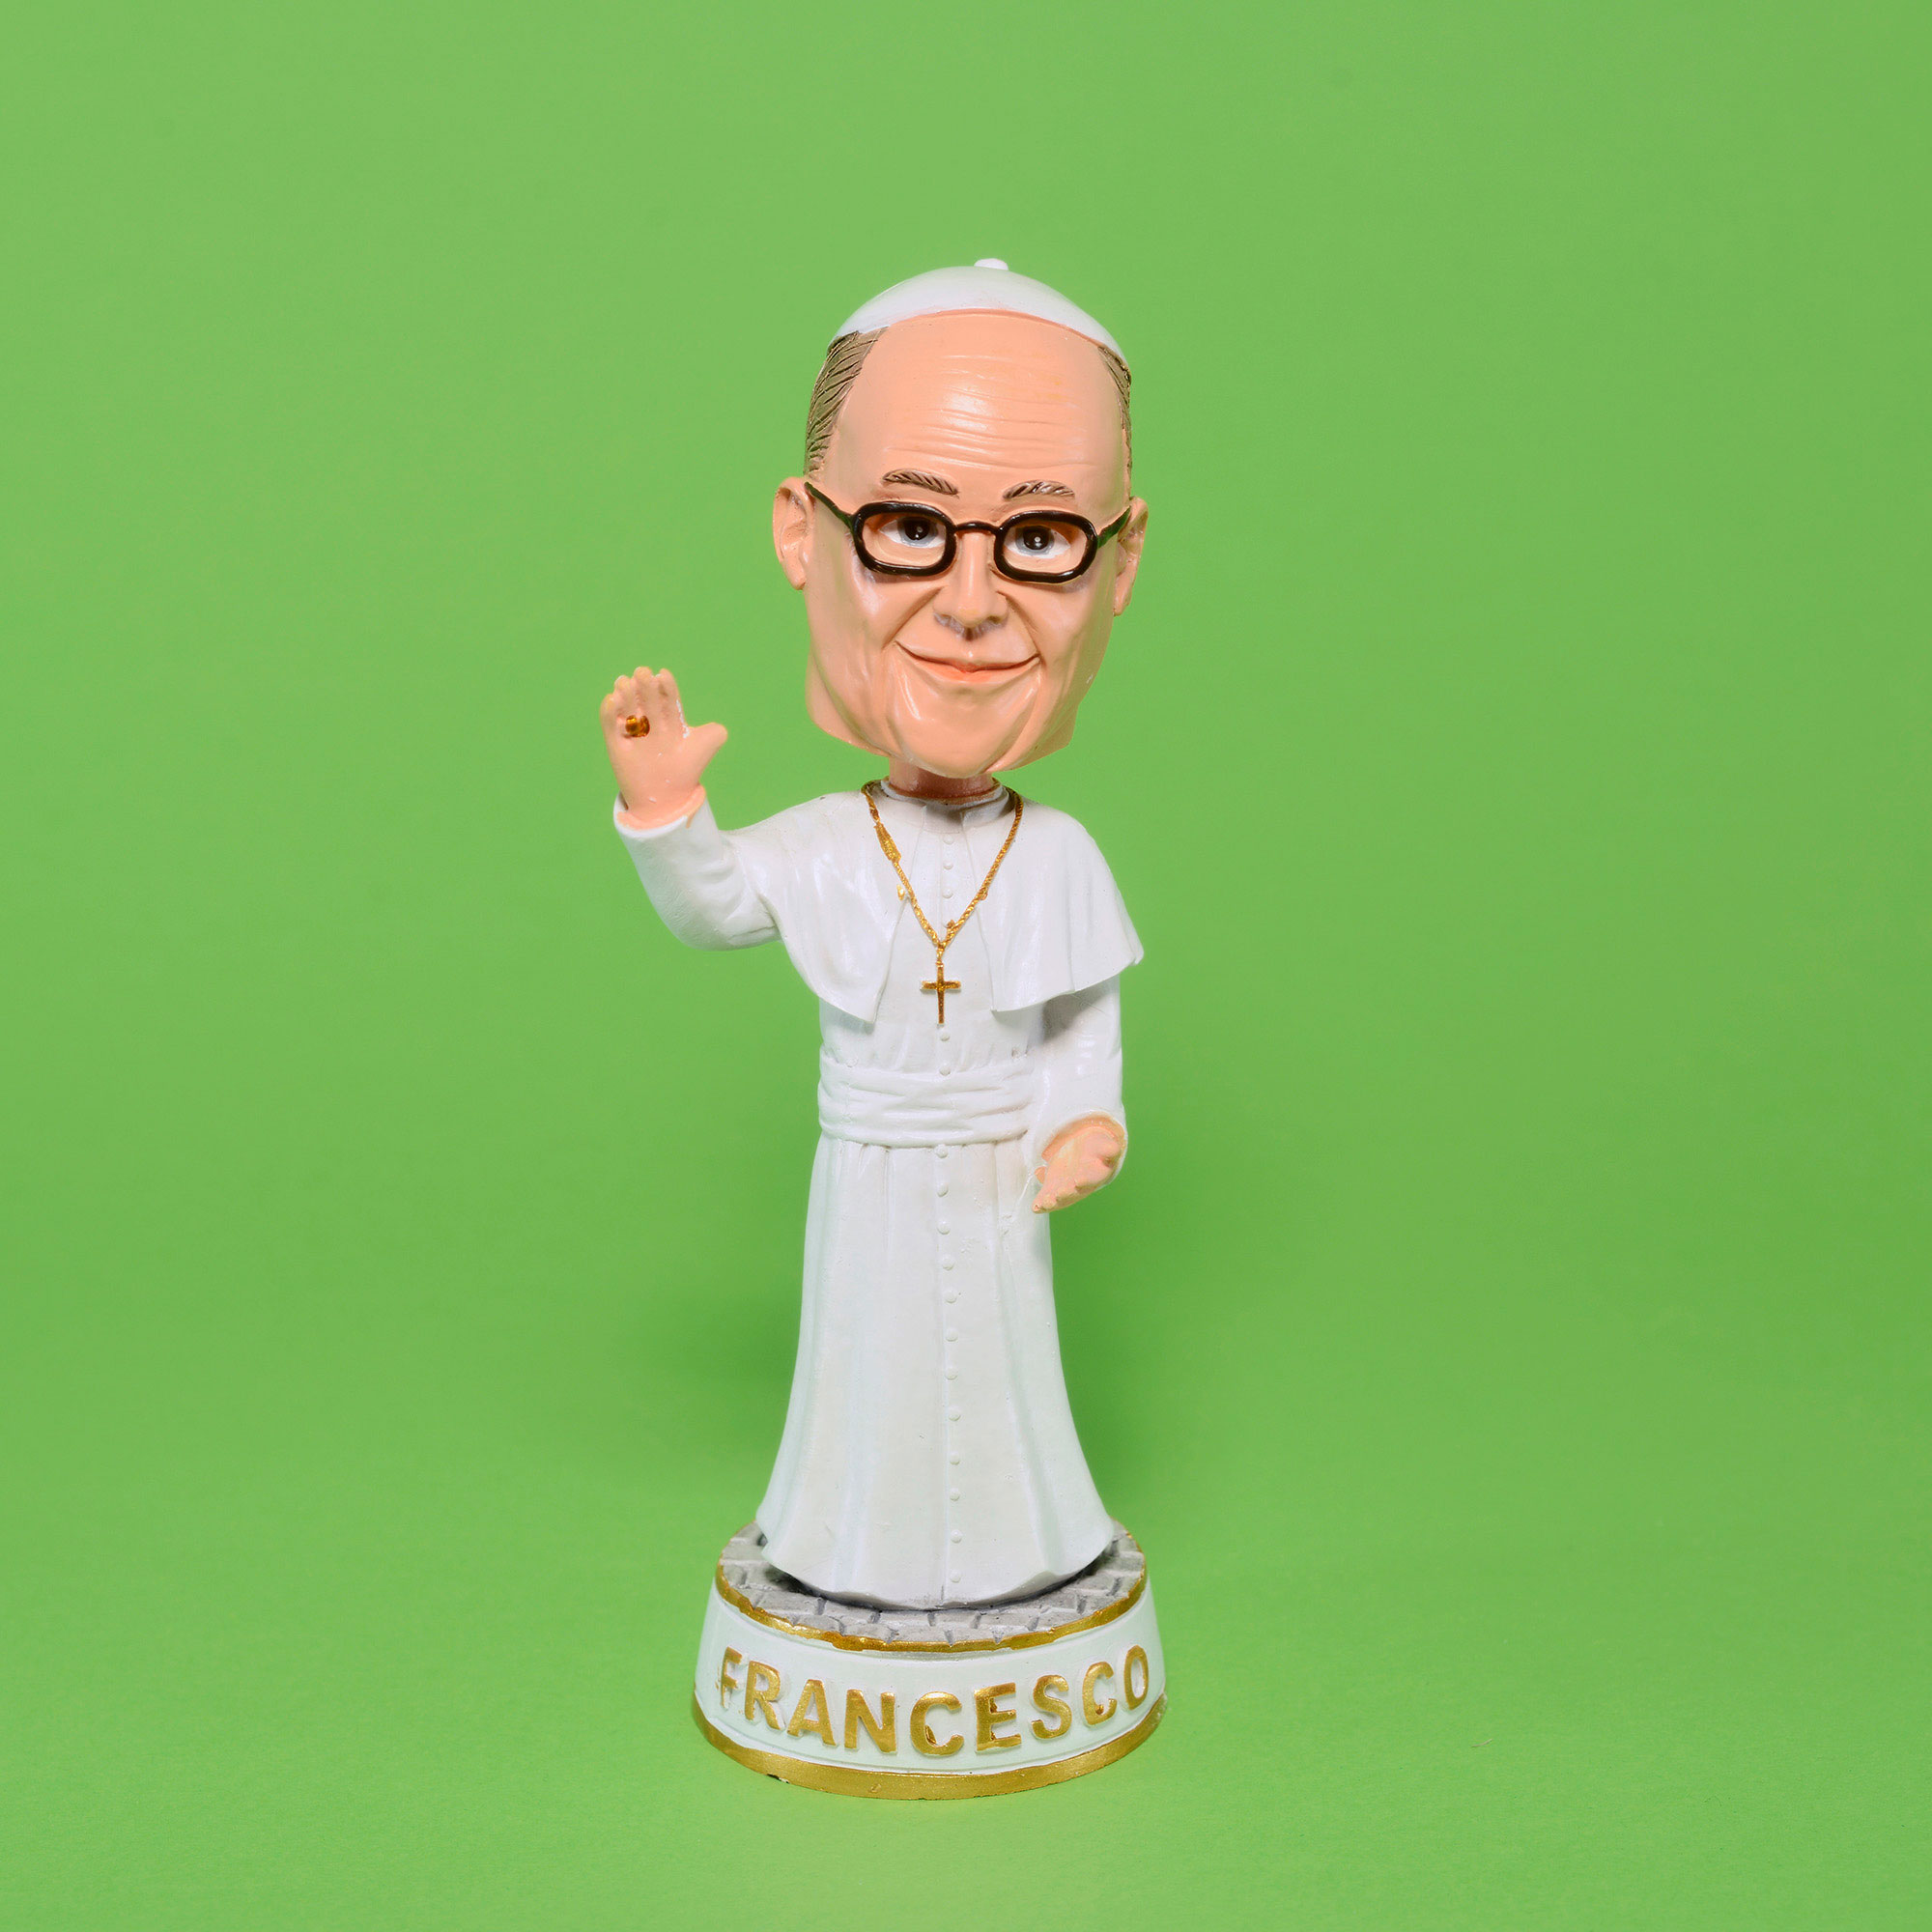 Pope Francis's moving head doll.

Price : 10 €